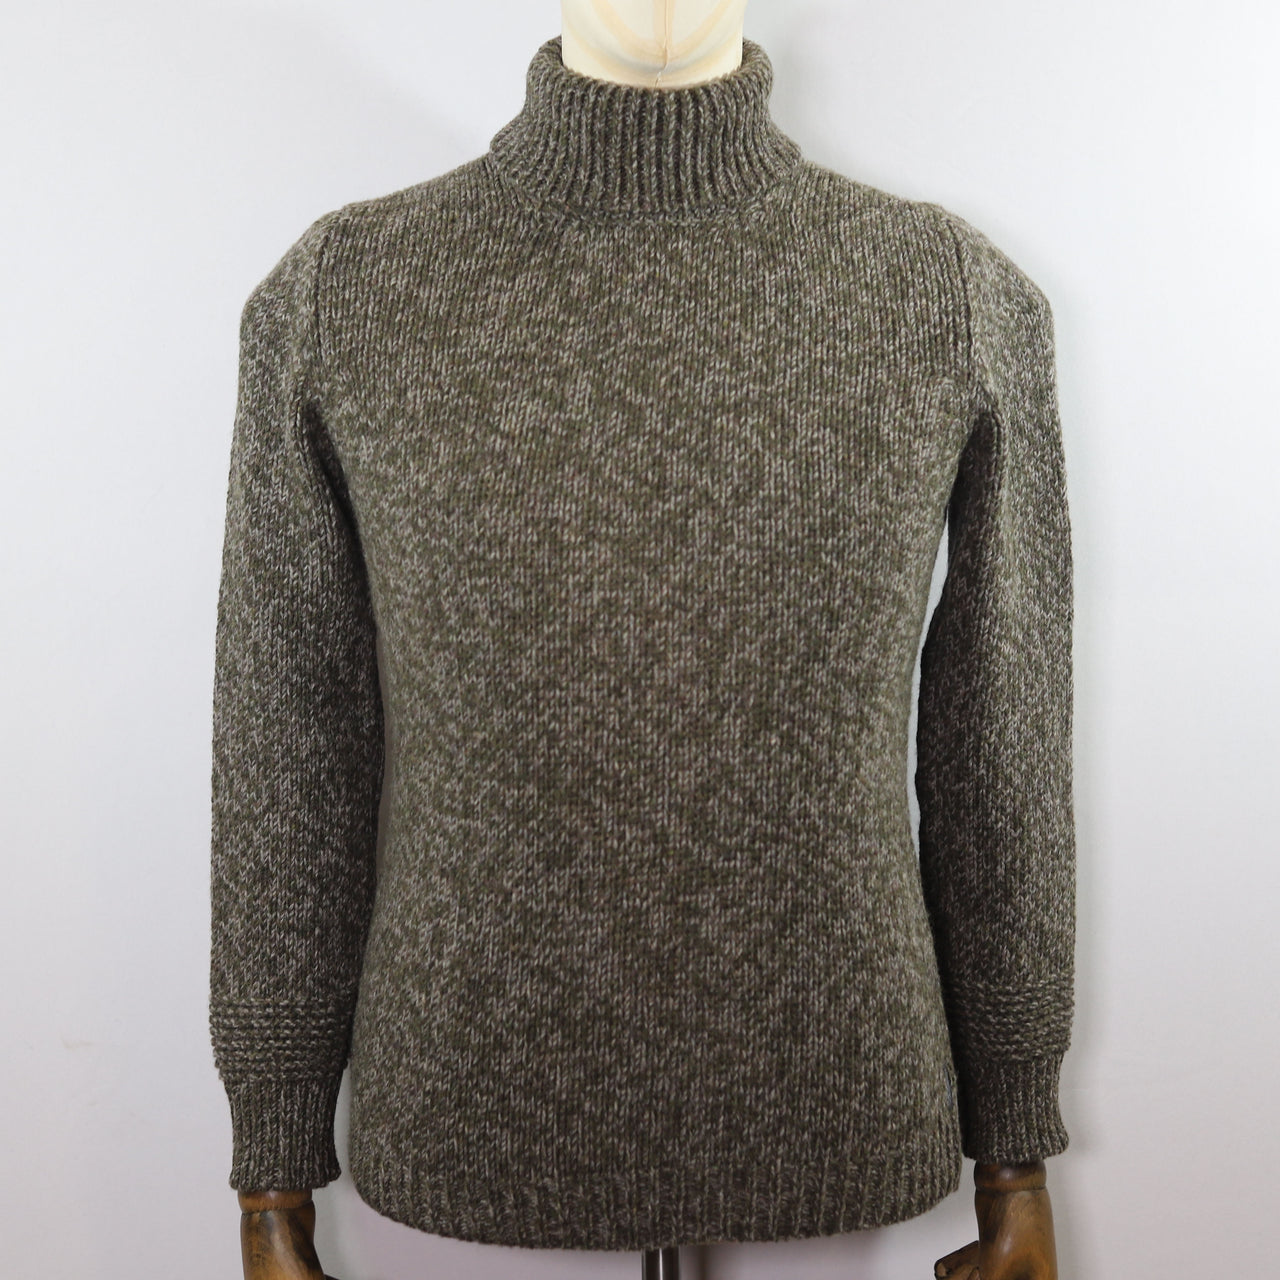 Fisherman out of Ireland Roll Neck Sweater - Hunter